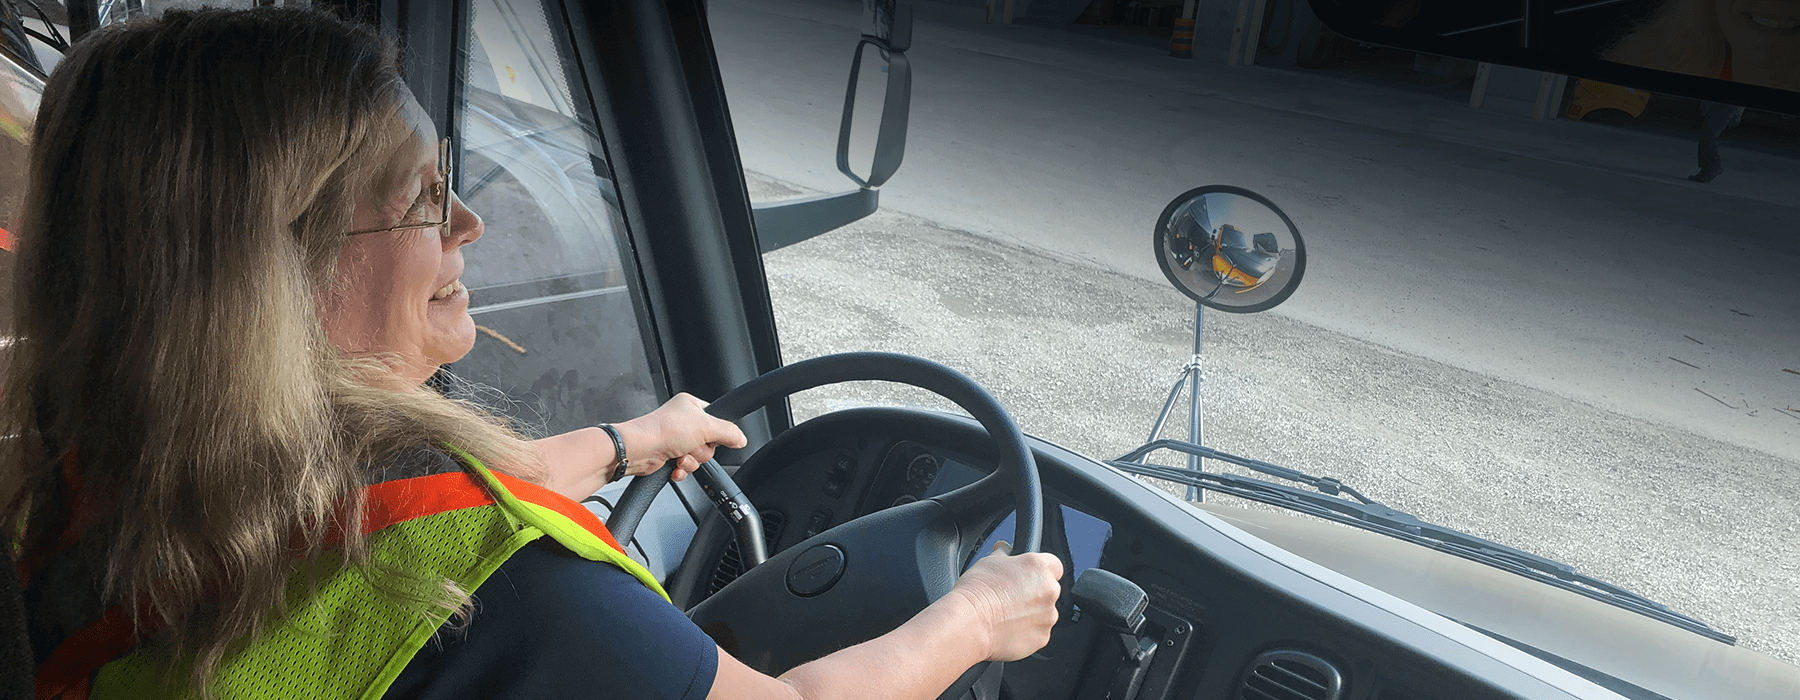 Become a School Bus Driver